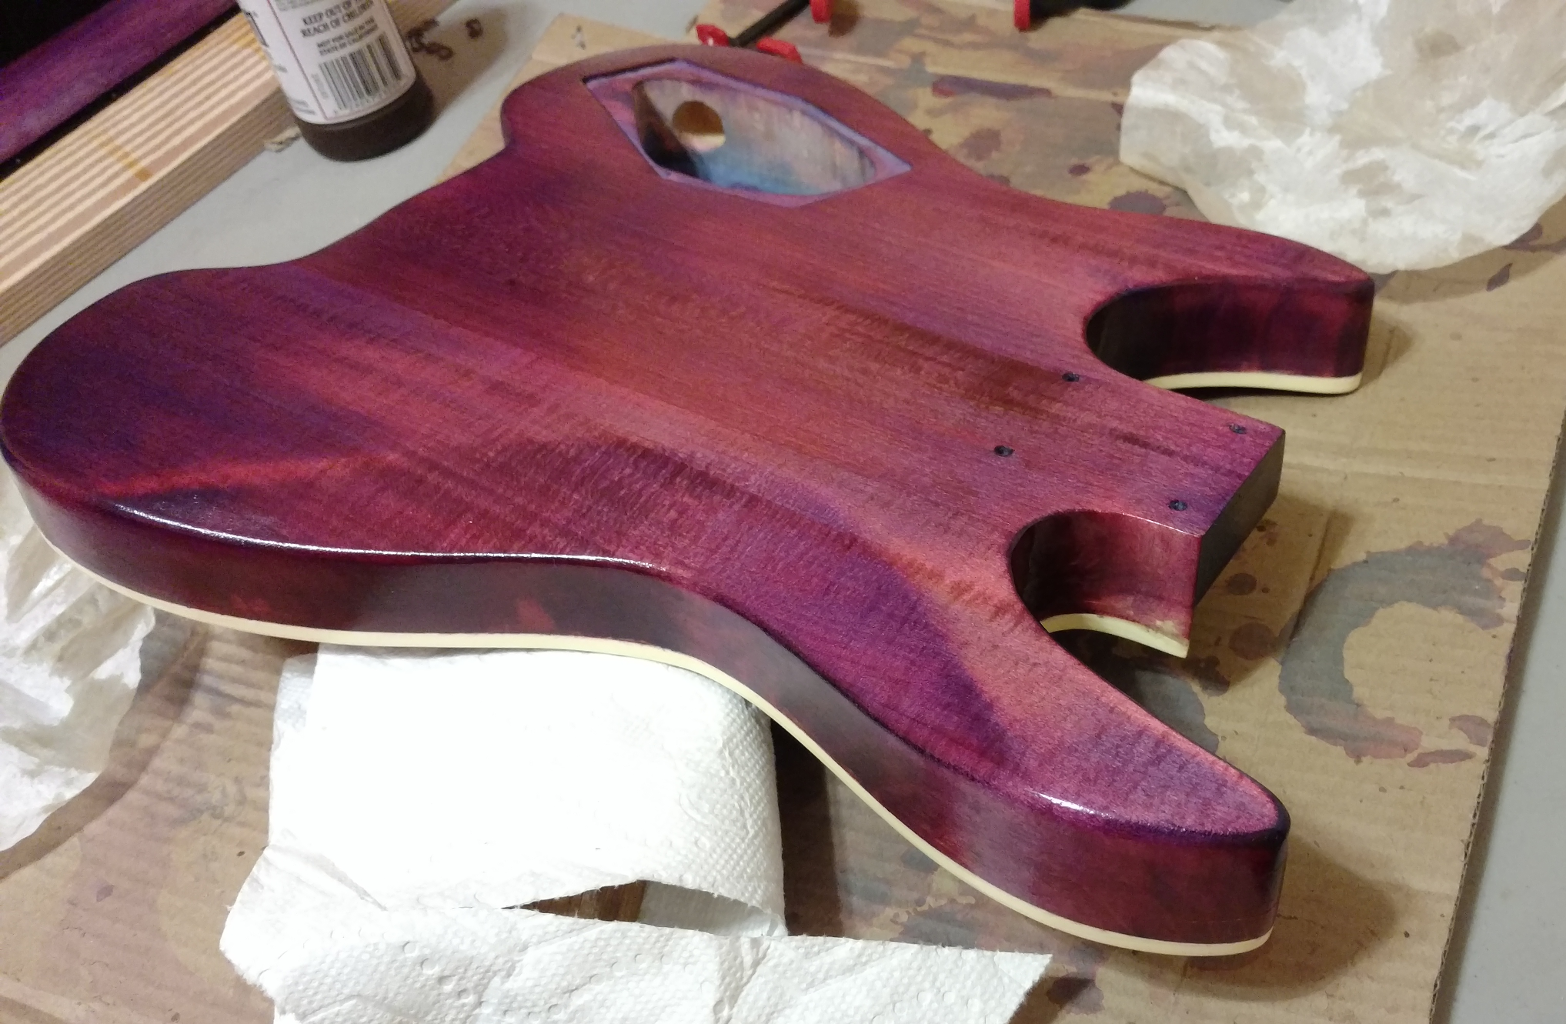 Keda Dye - Warmoth guitar build in progress. Colored wood is after